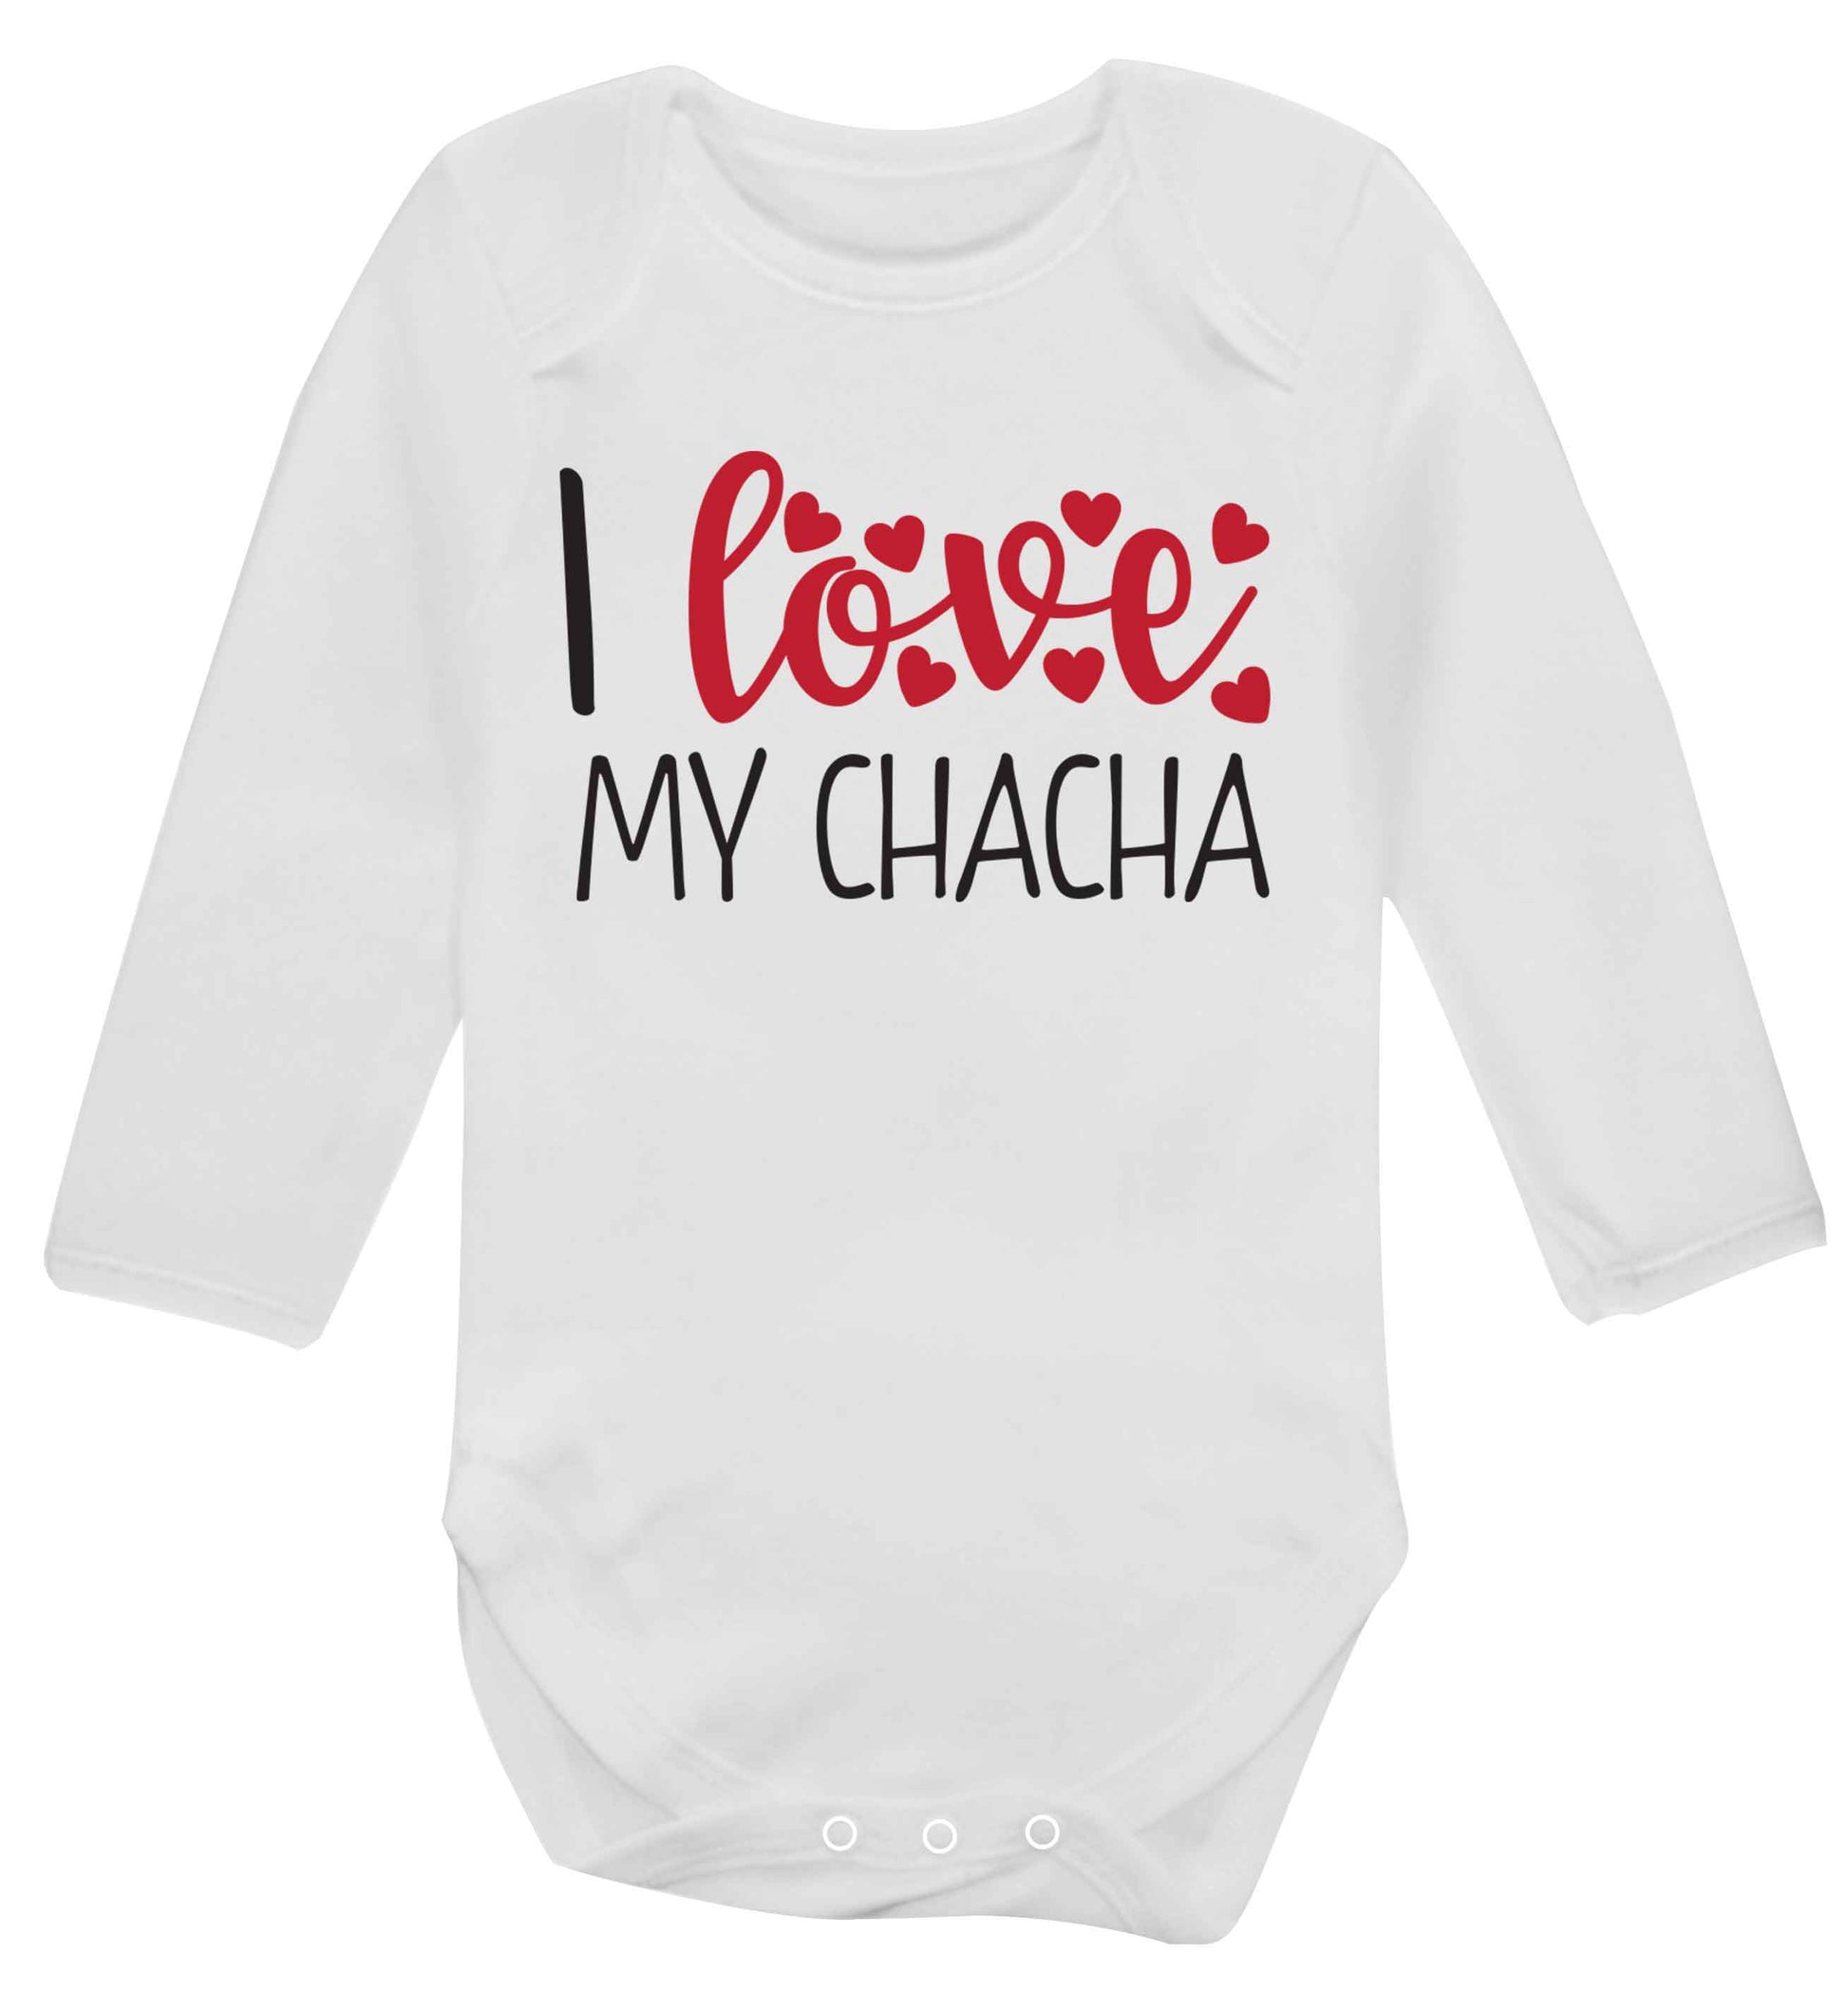 I love my chacha Baby Vest long sleeved white 6-12 months